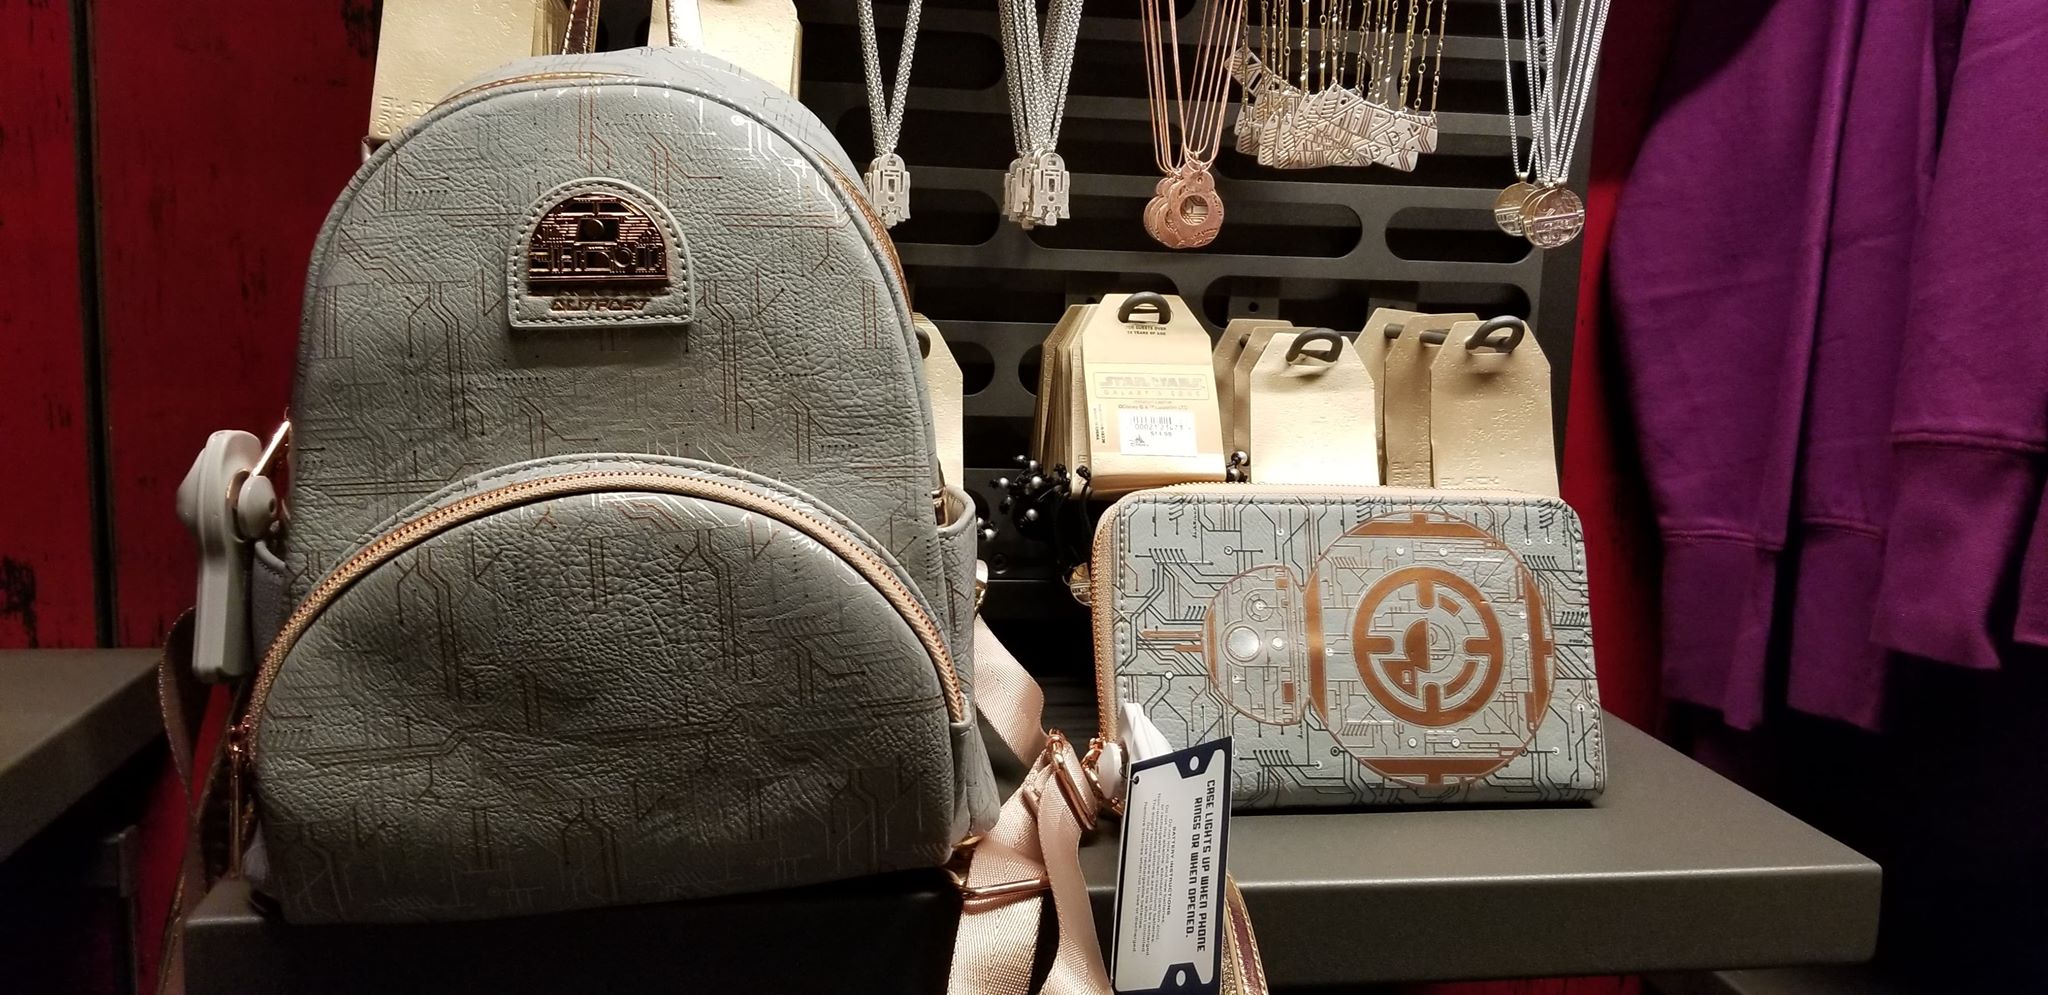 Galactic Cute Droid Accessories From The Droid Depot In Galaxy's Edge